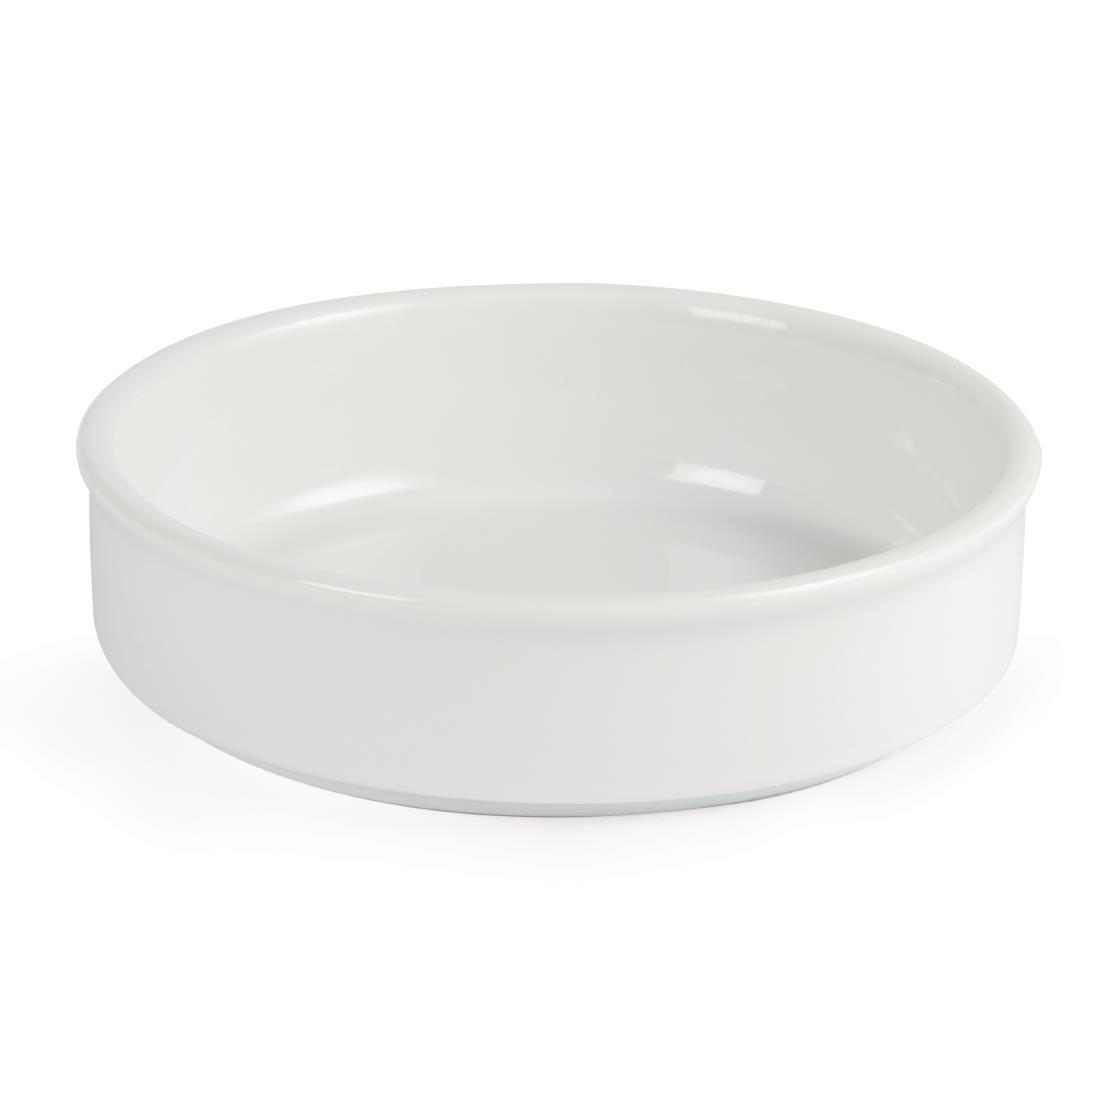 Olympia Mediterranean Stackable Dishes White 134mm (Pack of 6) - DK828  - 2